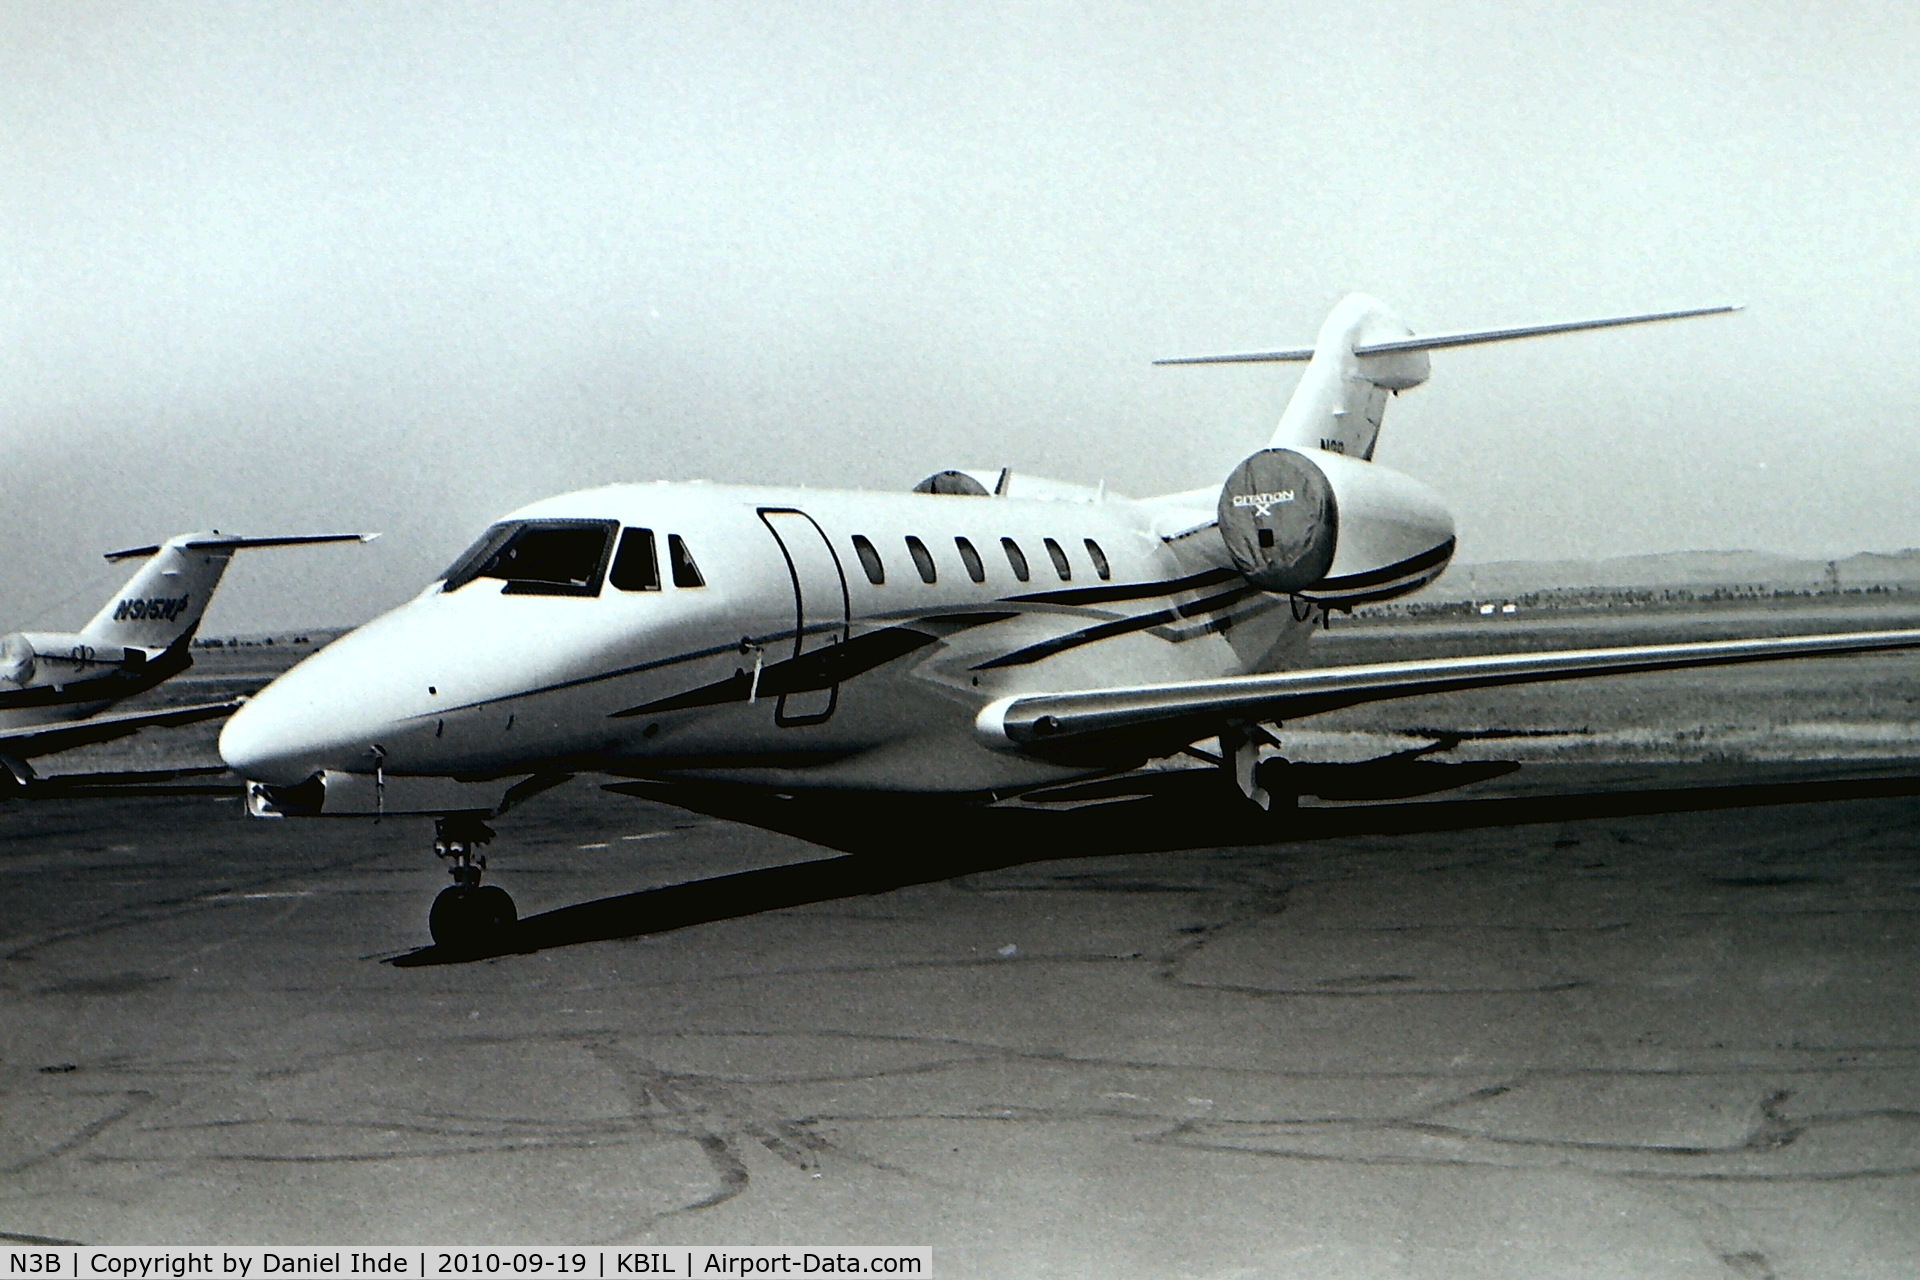 N3B, 2002 Cessna 750 Citation X C/N 750-0177, Testing my new (old) Rollei 35 film camera loaded with Kodak Tri-X 400 Film.  Self developed in a 1:100 diluted soup.